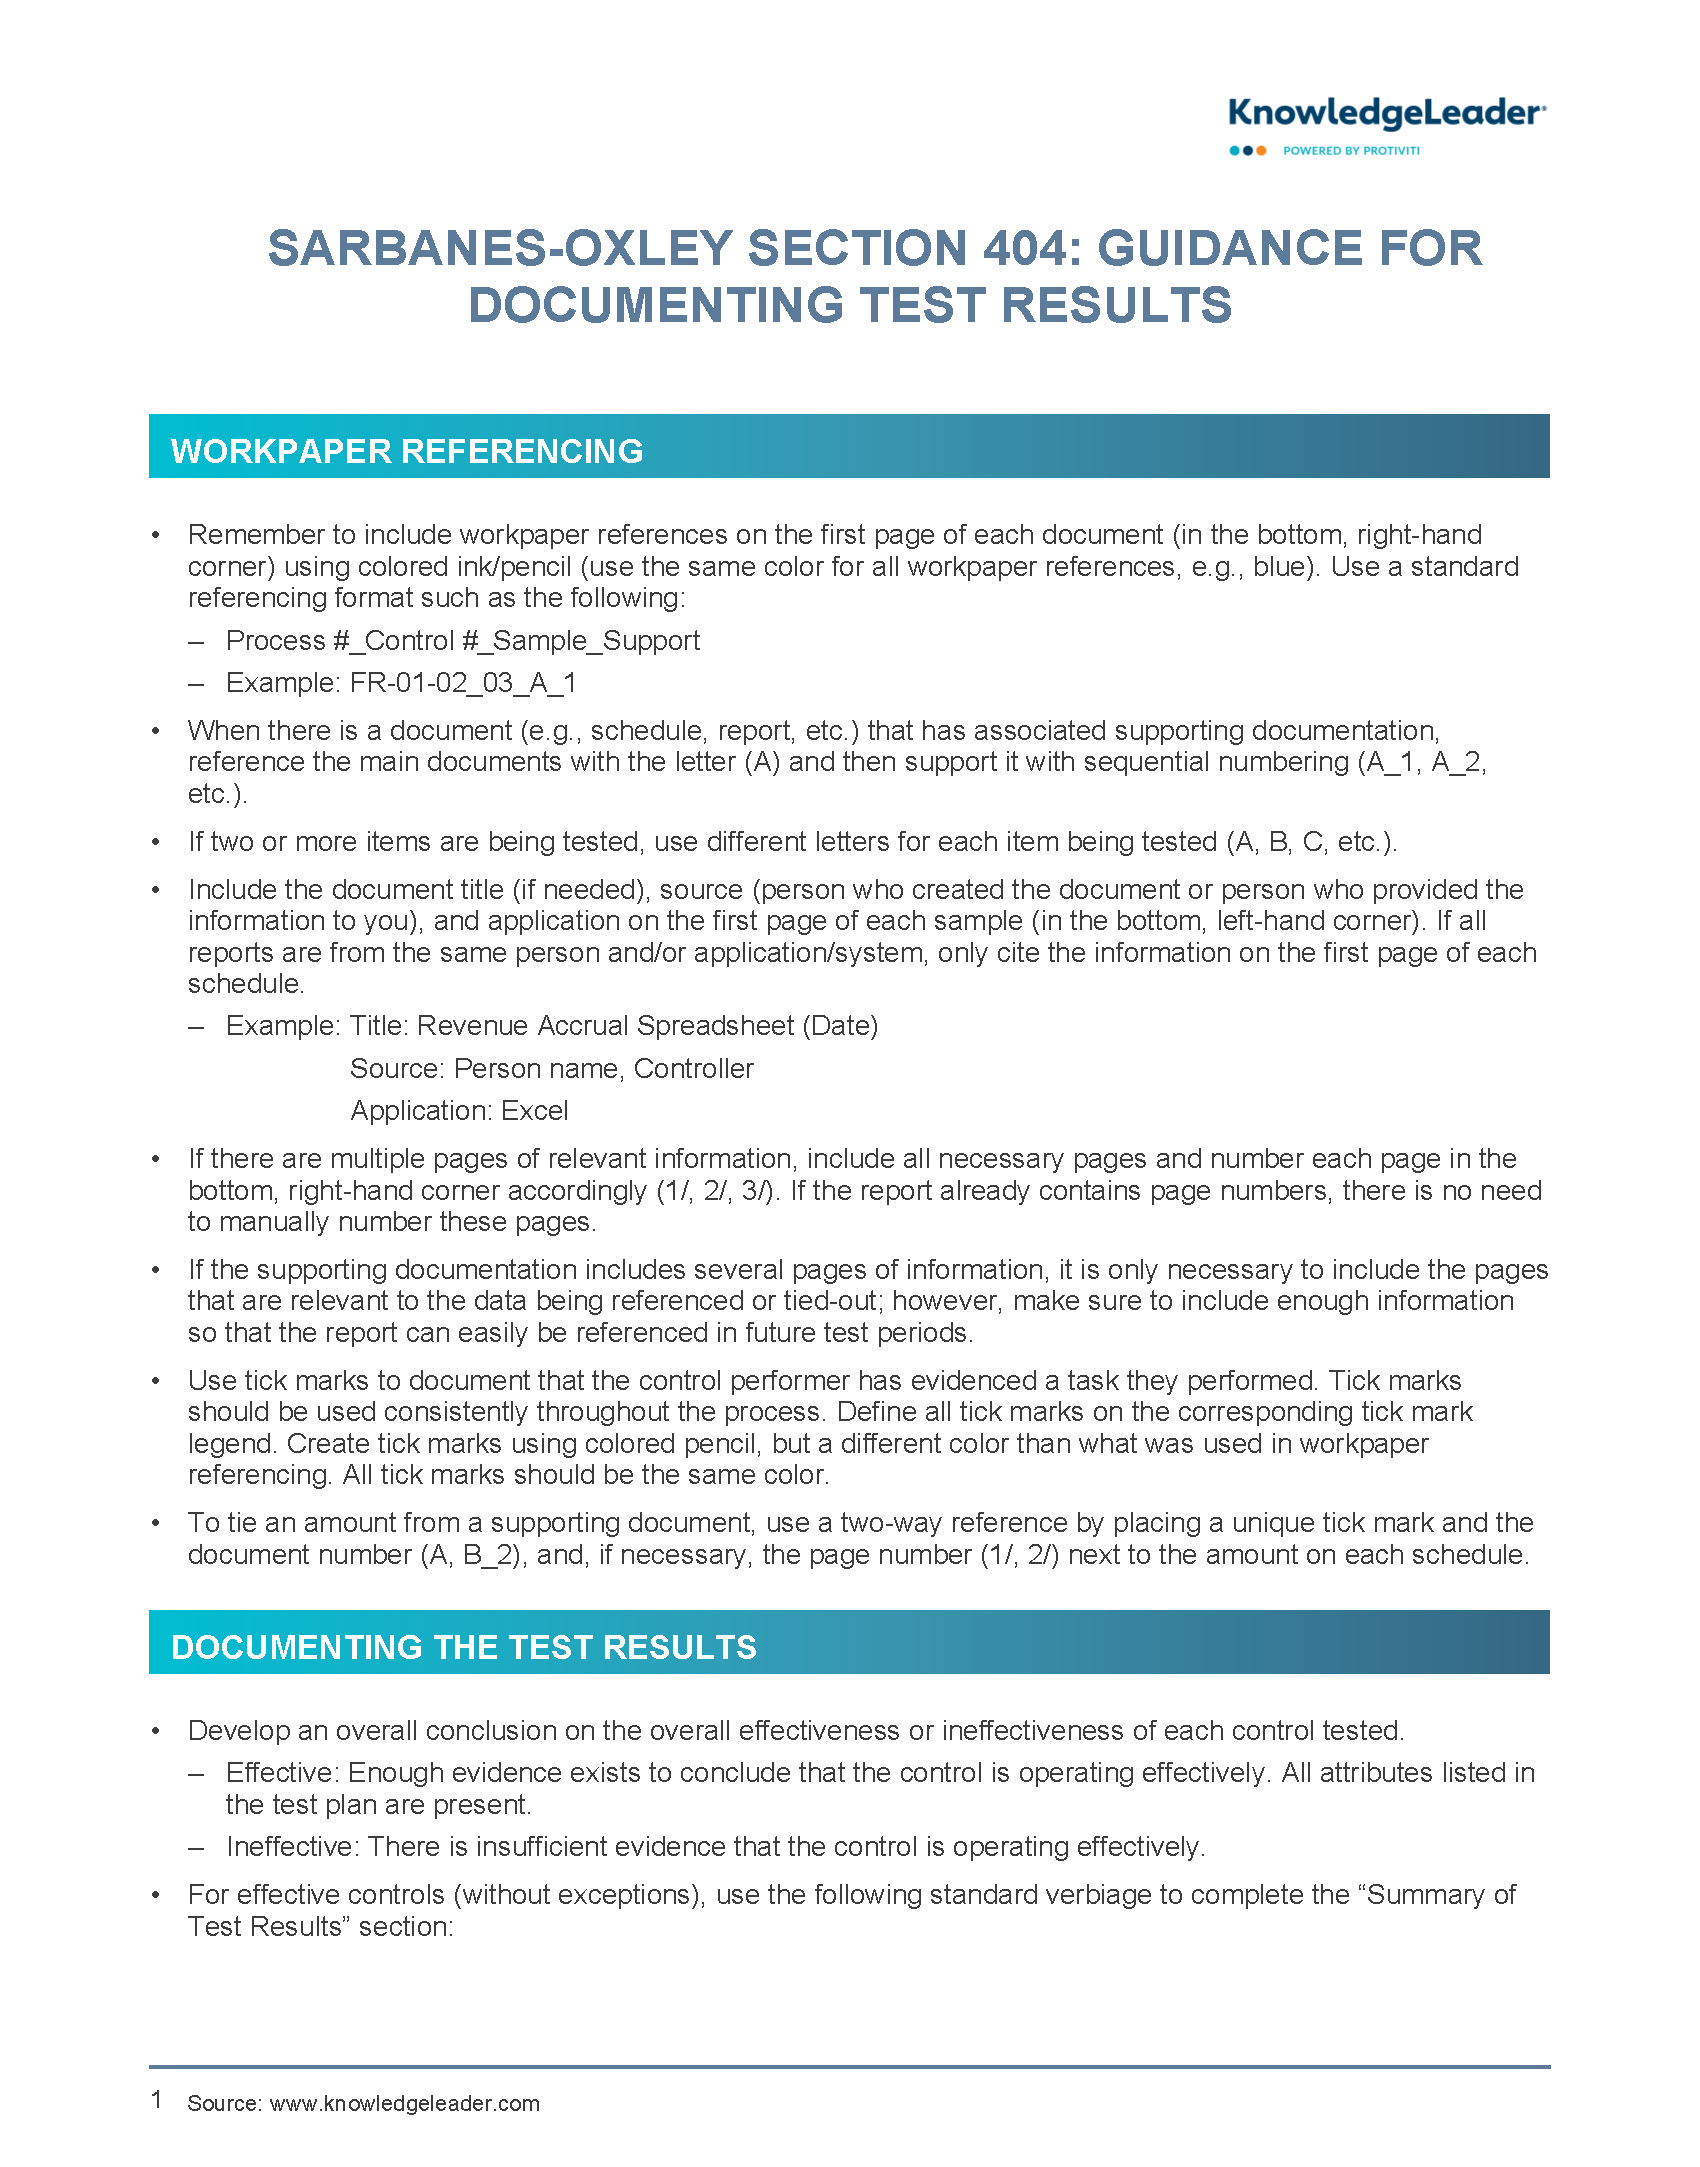 Guidance for Documenting Test Results - Sarbanes-Oxley Section 404